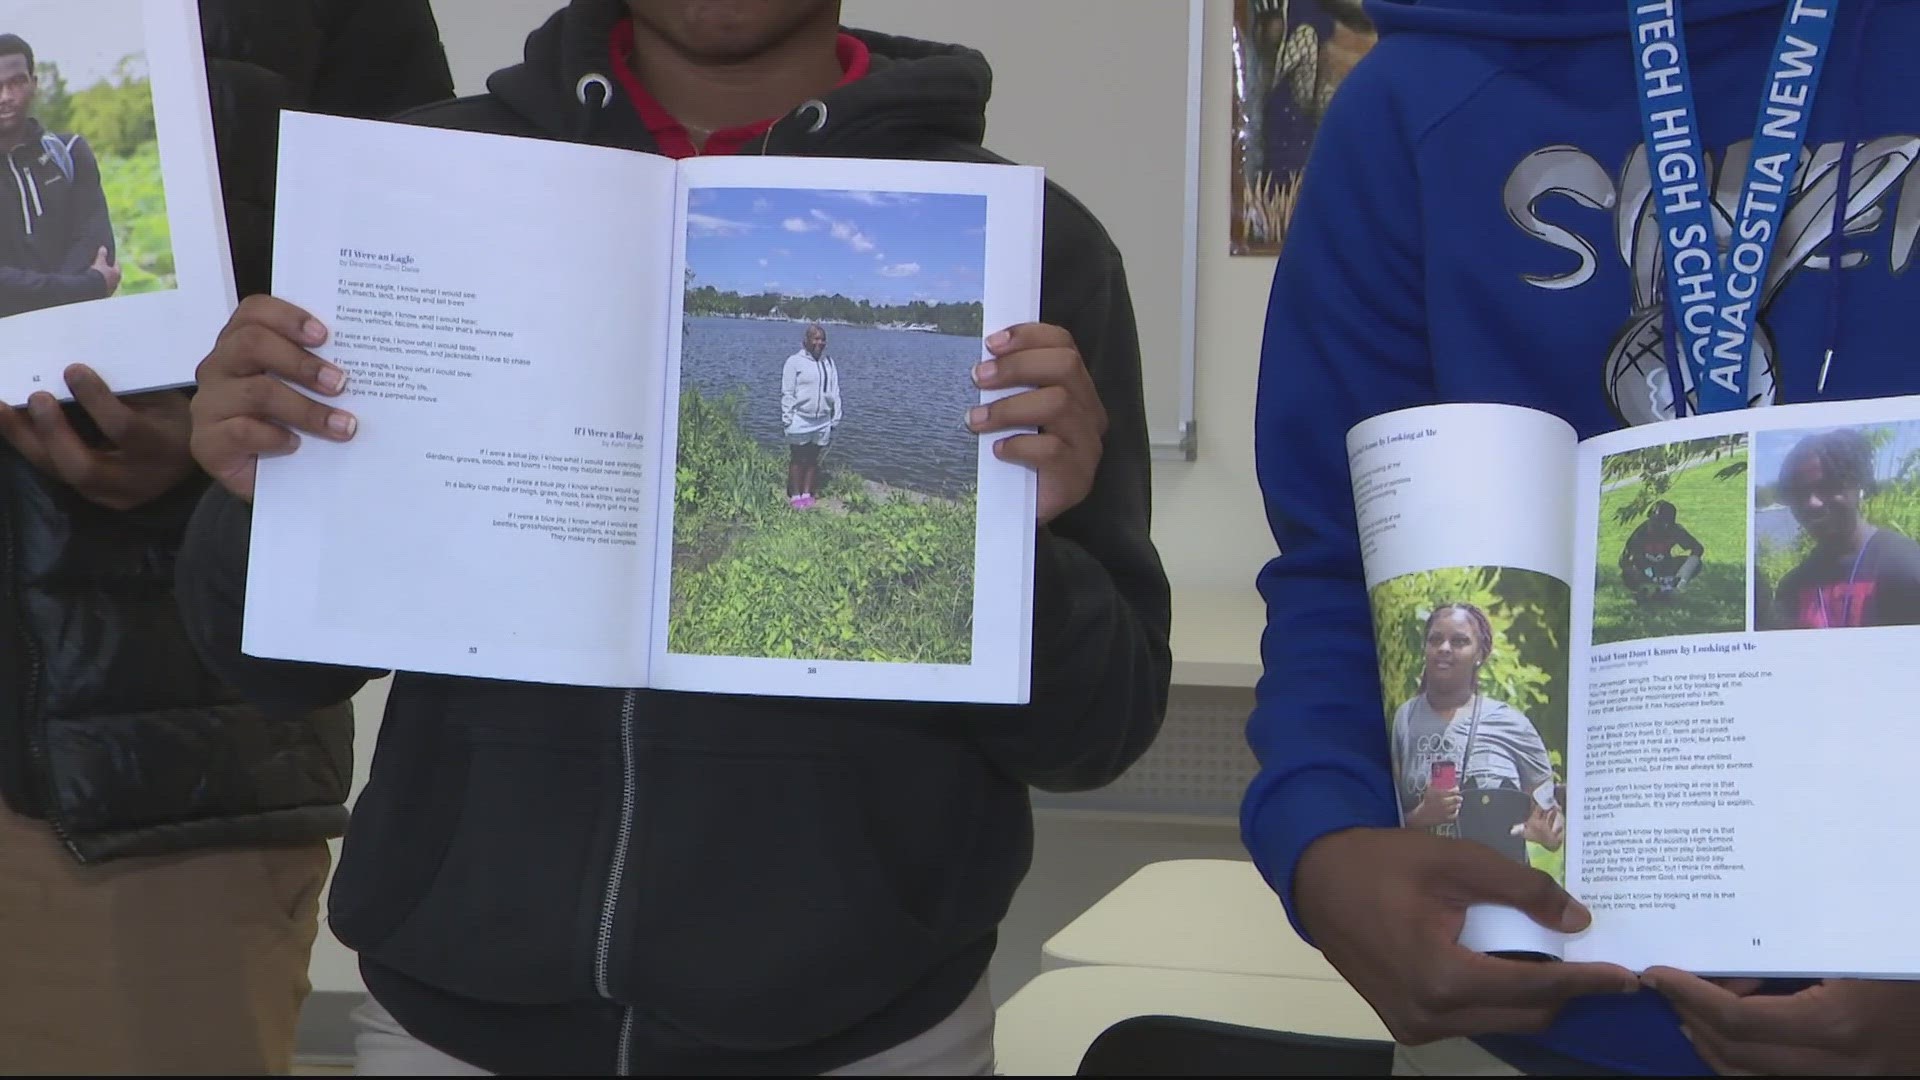 A group of students from Anacostia High School worked over the summer to write, edit, and publish their very own book.